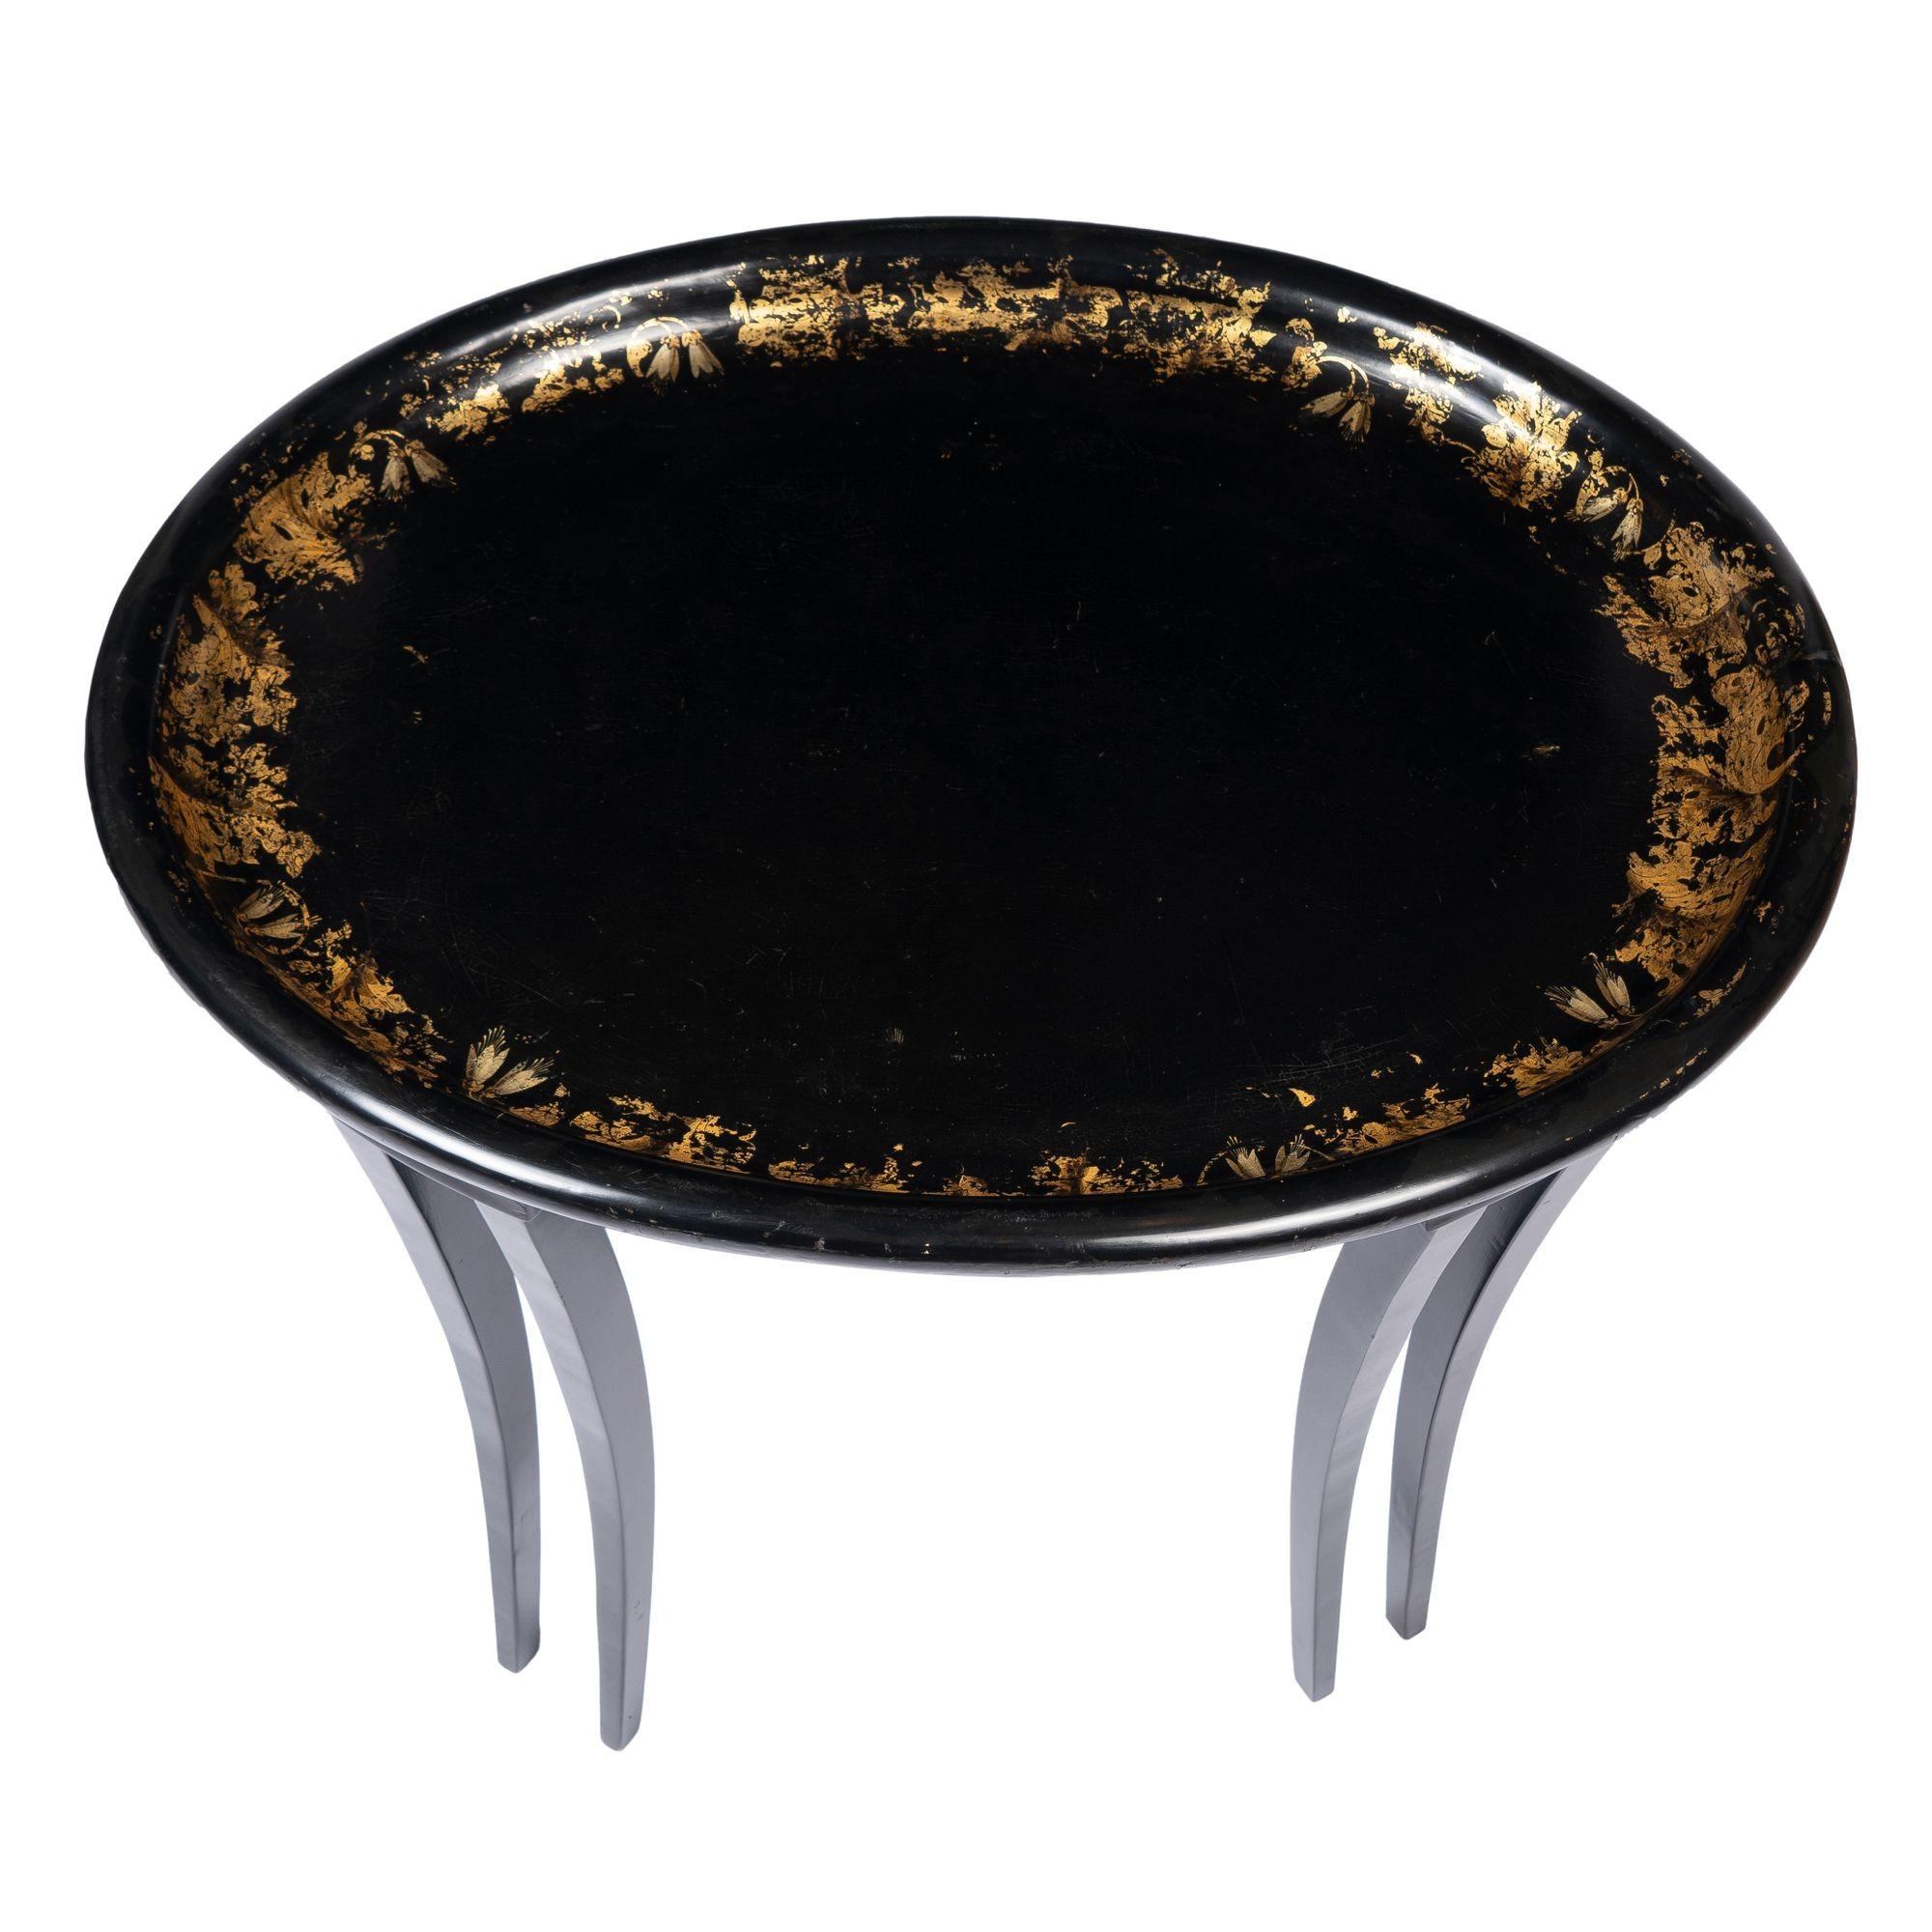 English Oval Paper Mache Tray Table on Custom Sabre Leg Stand, c. 1835 For Sale 2